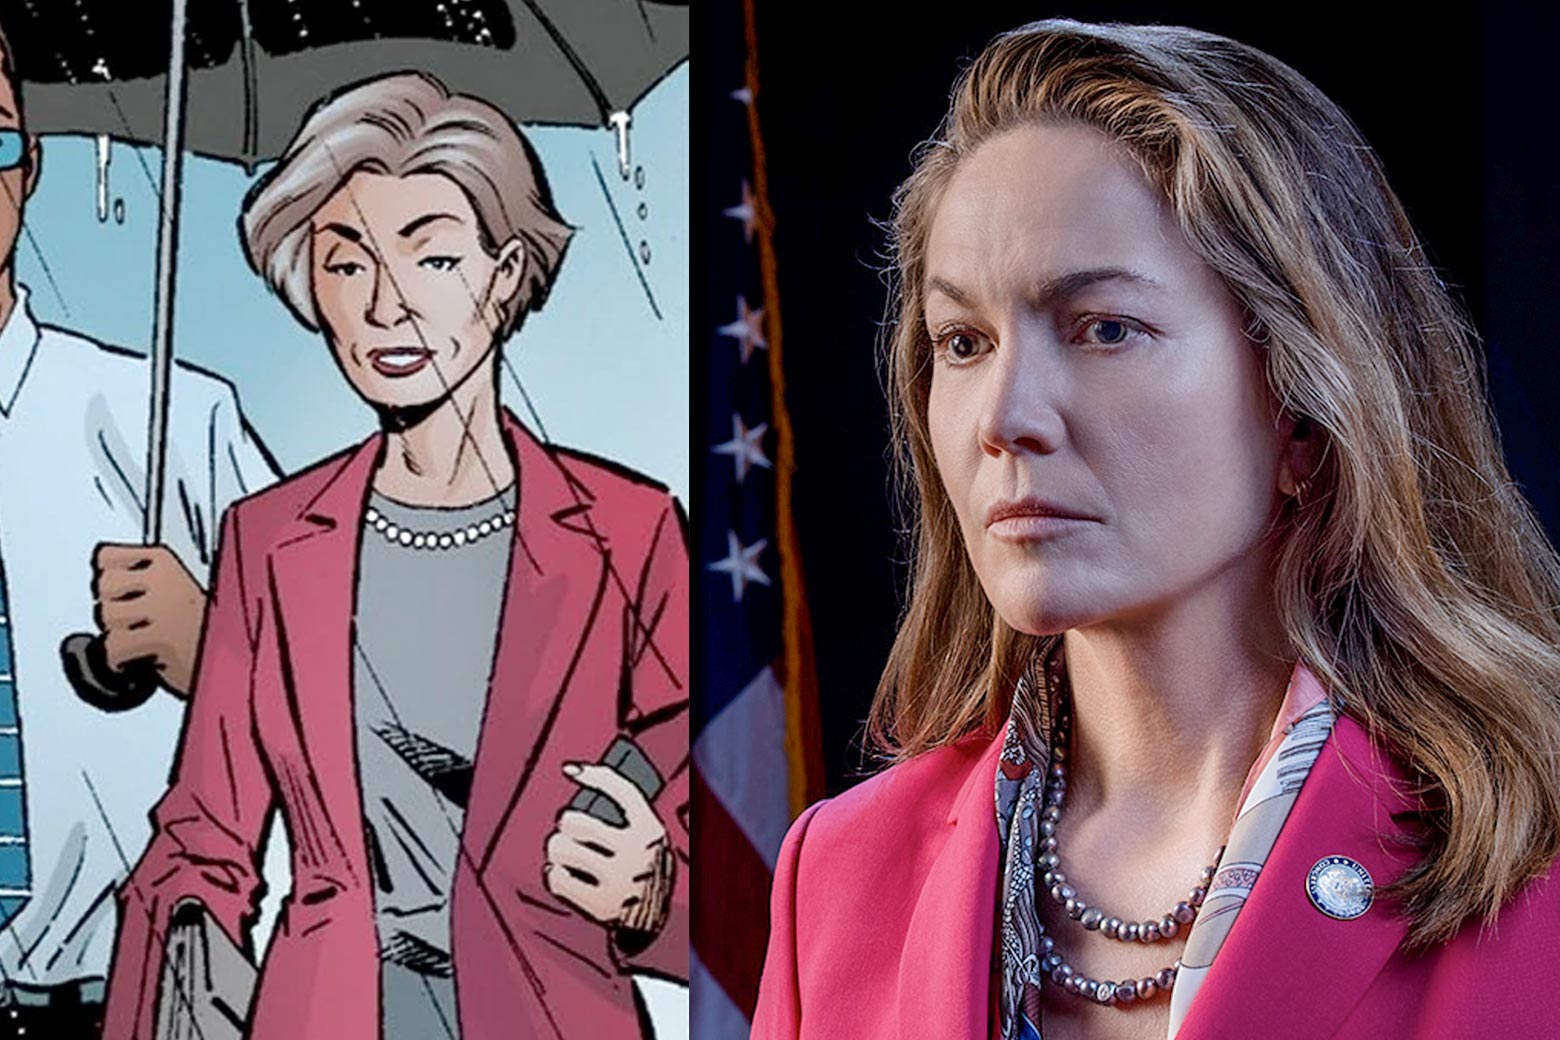 Side-by-side images of Jennifer Brown in the comic and Diane Lane as Jennifer Brown in the TV show